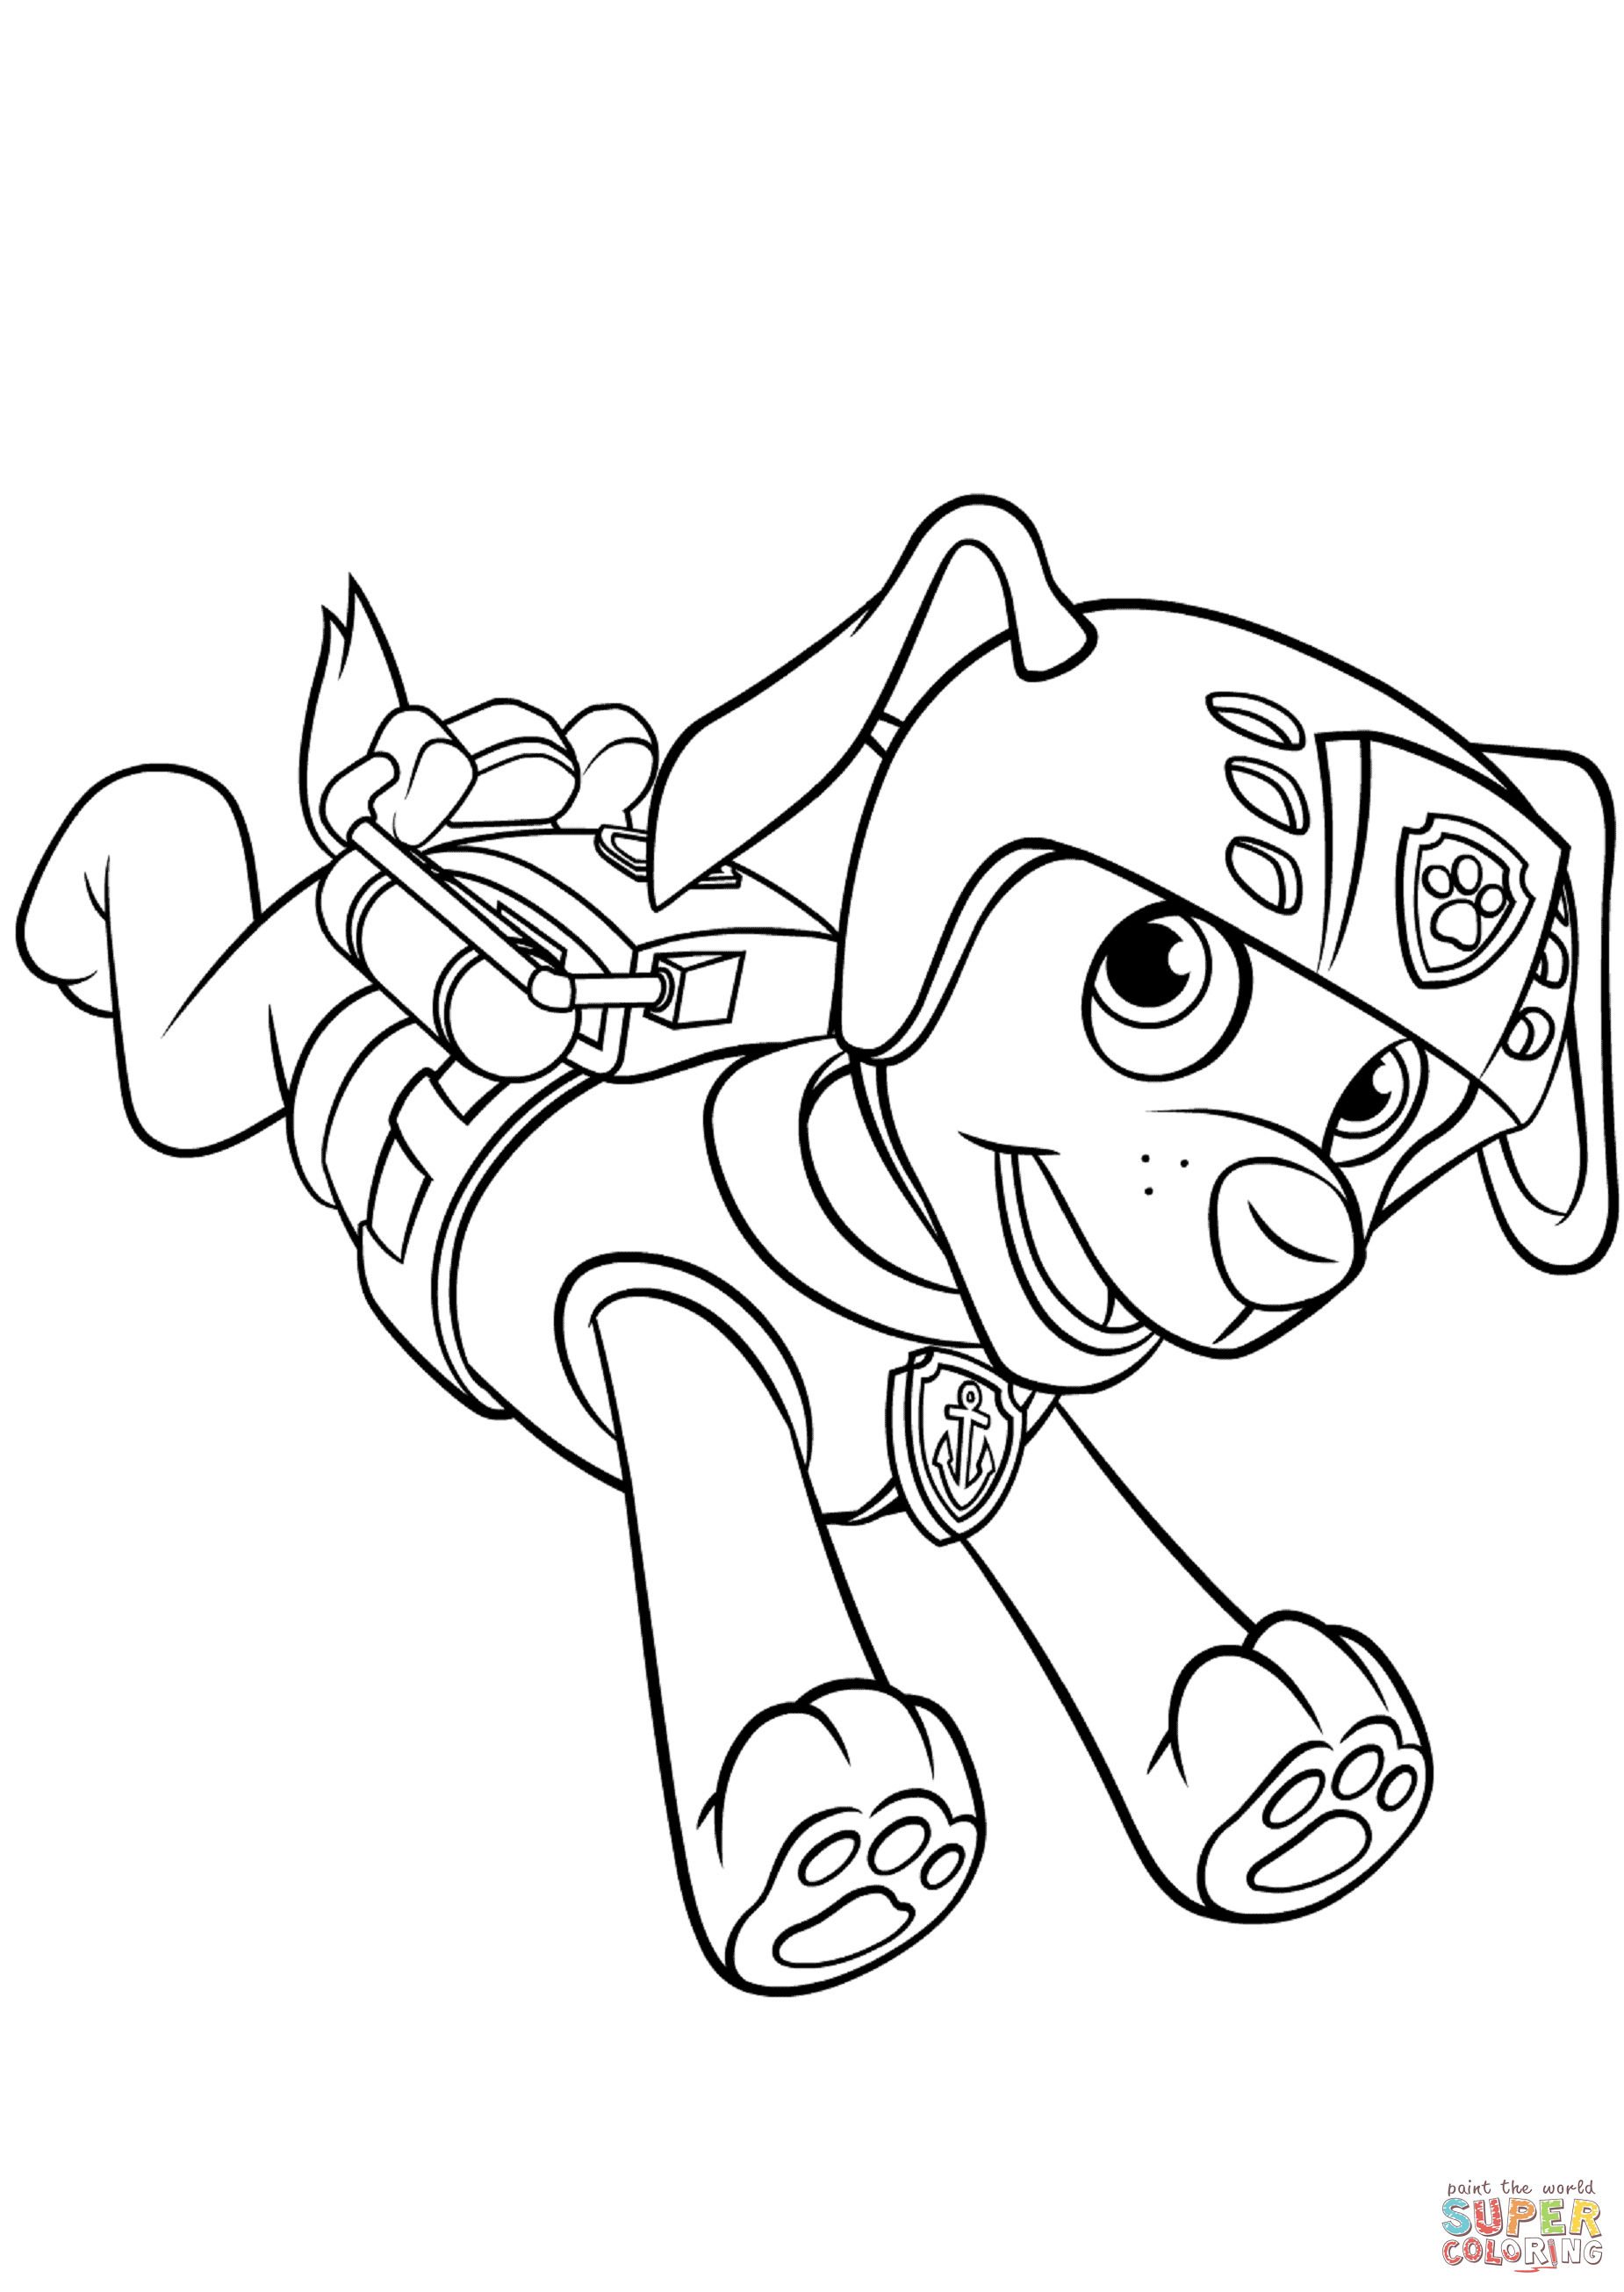 Zuma With Scuba Gear Backpack Coloring Page | Free Printable - Free Printable Gears